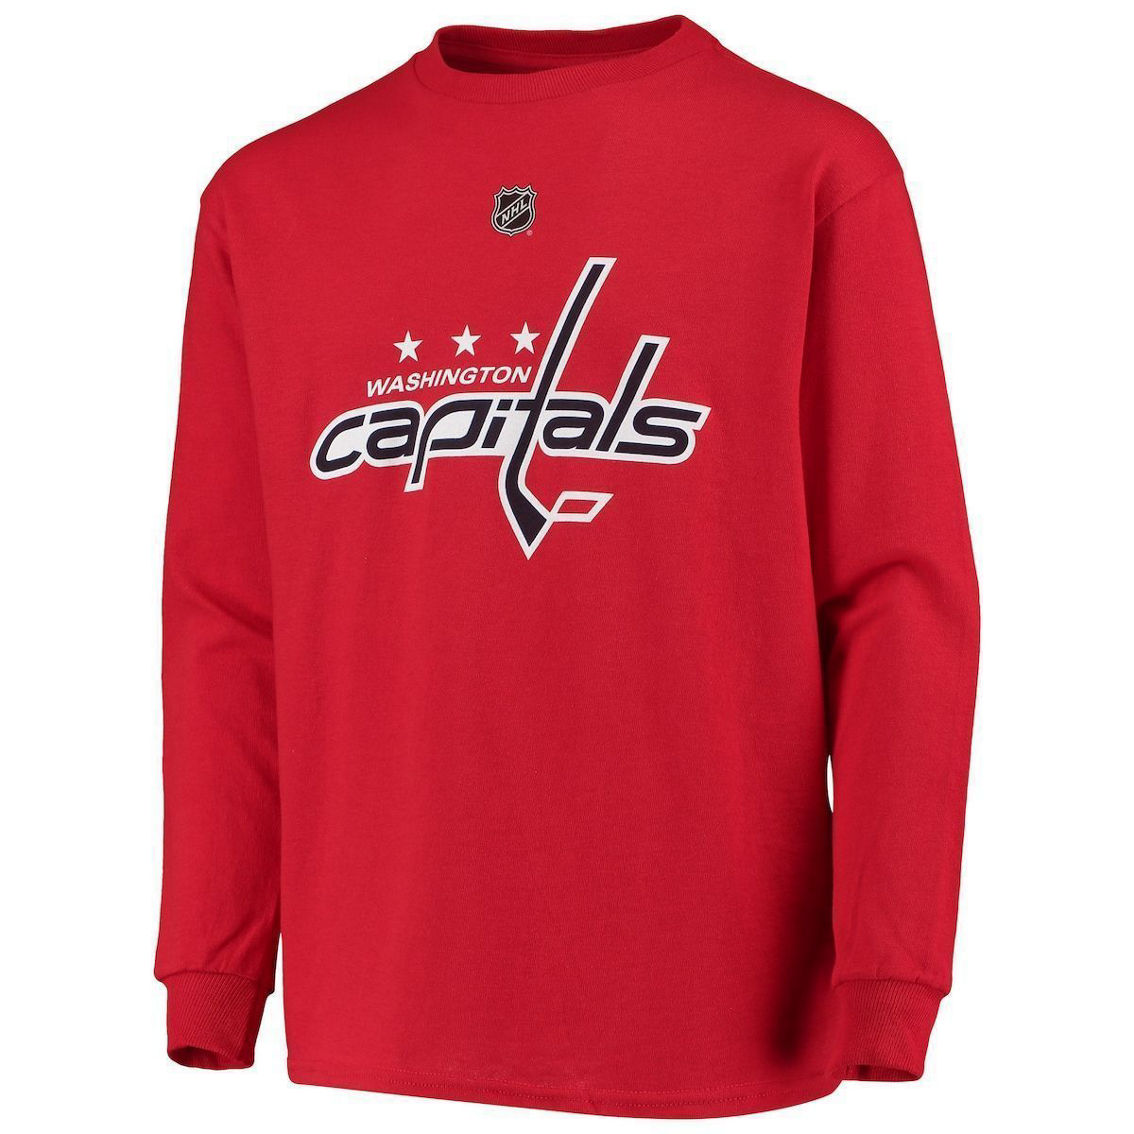 Outerstuff Youth TJ Oshie Red Washington Capitals Authentic Stack Long Sleeve Name & Number T-Shirt - Image 3 of 4